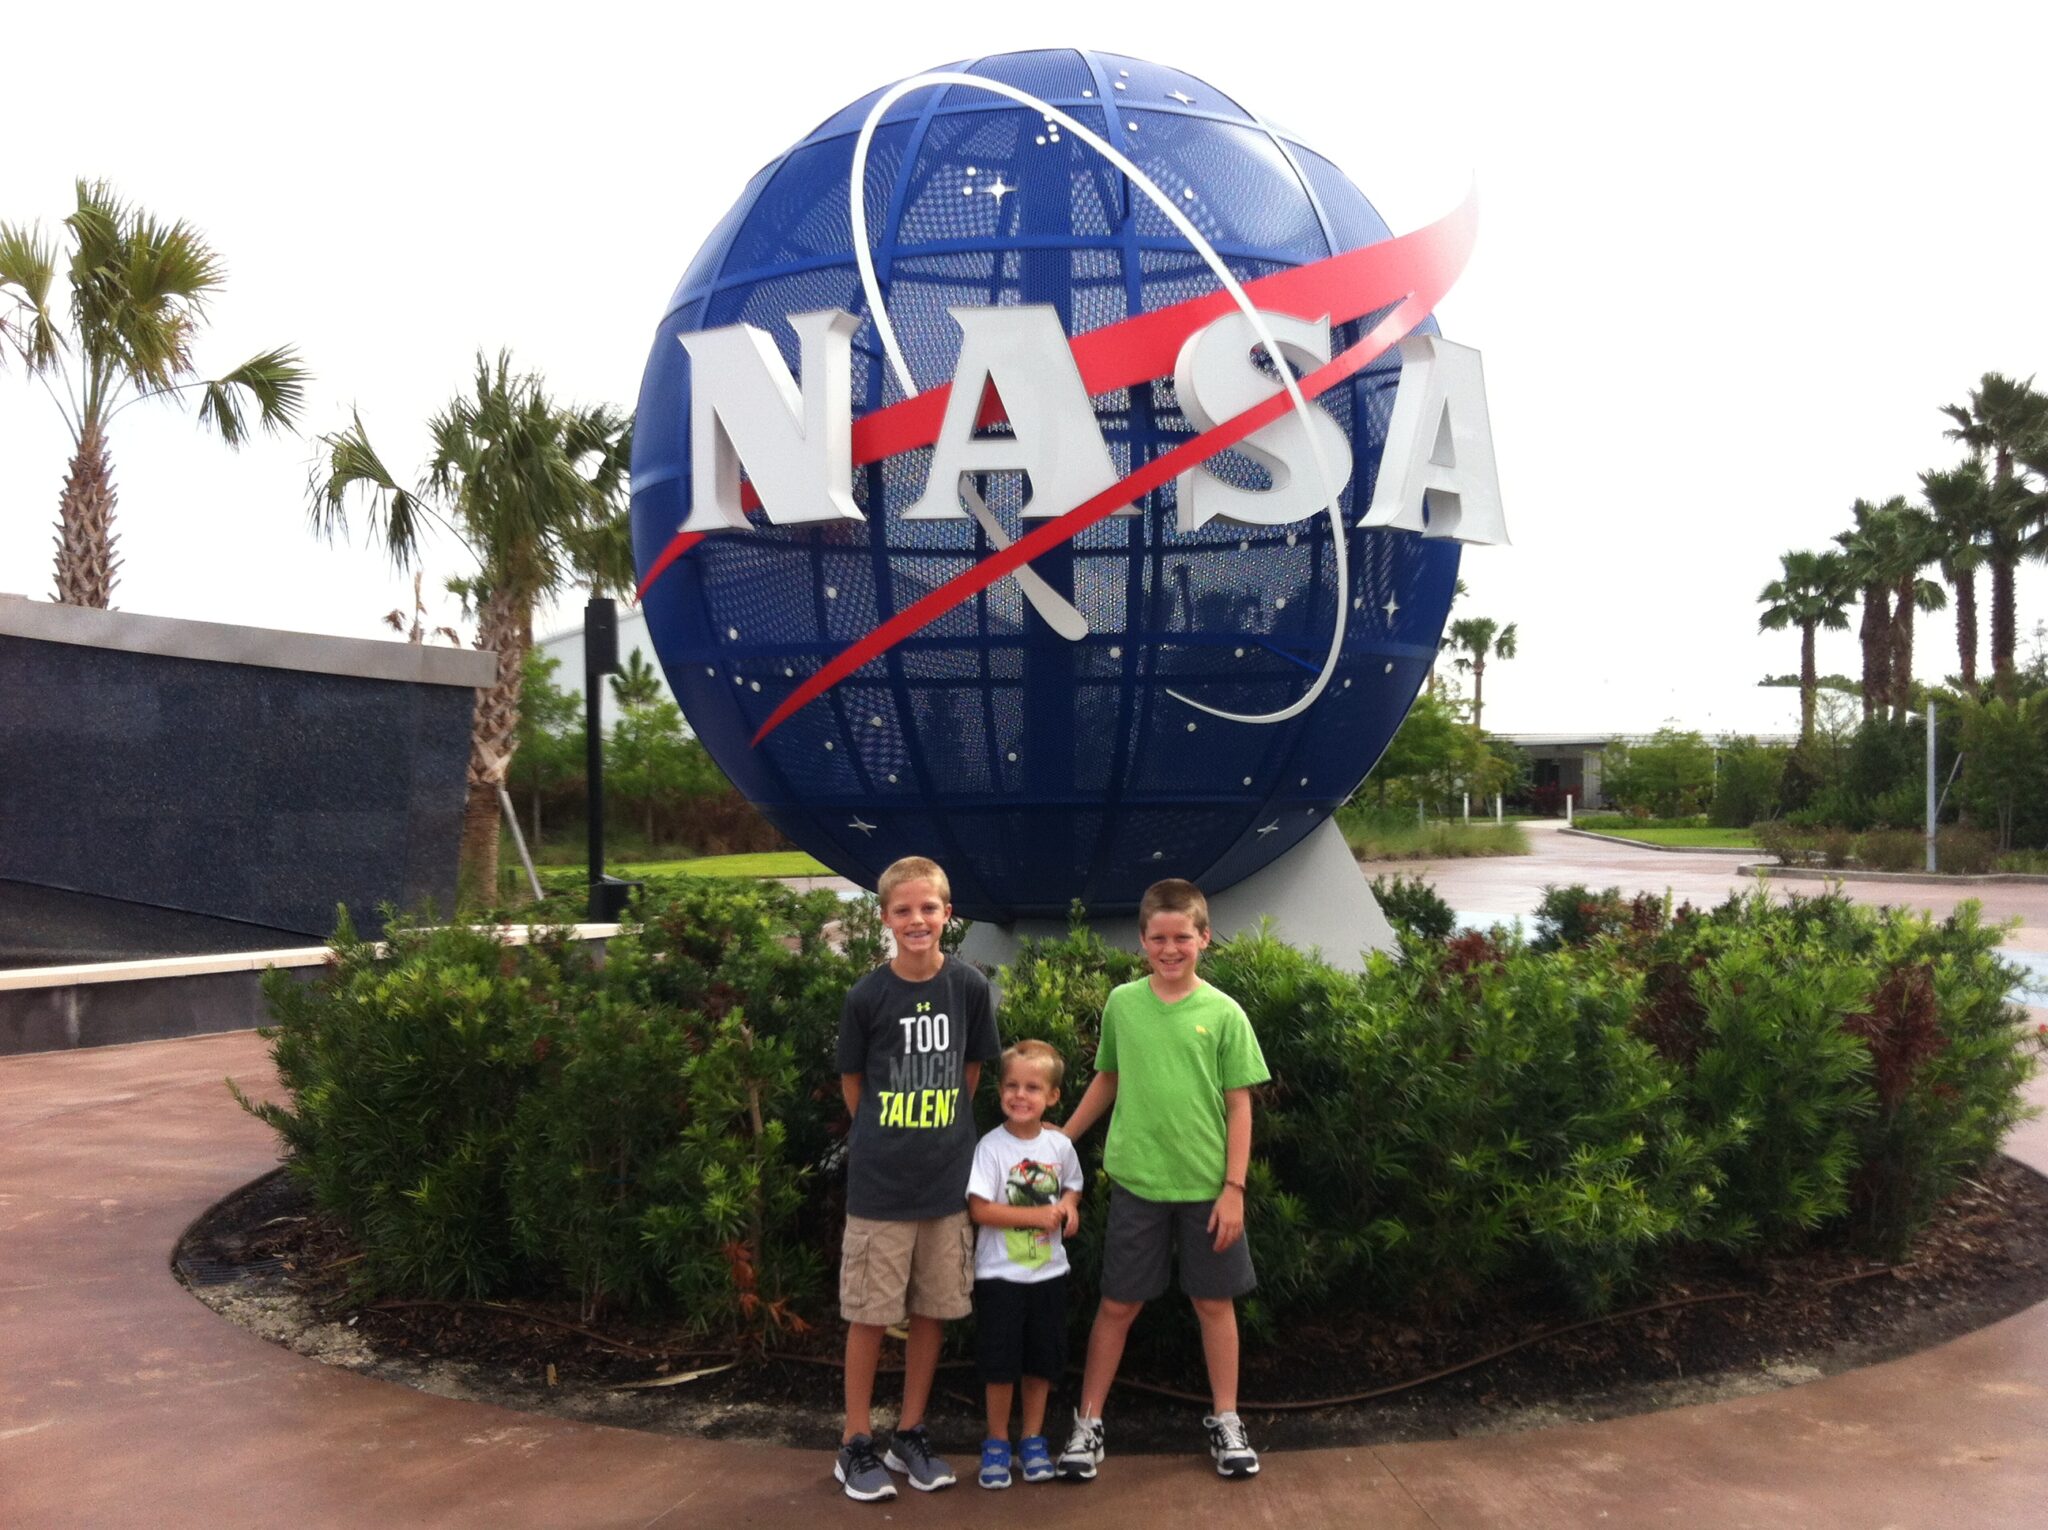 When You Have An Extra Day at Walt Disney World: Kennedy Space Center